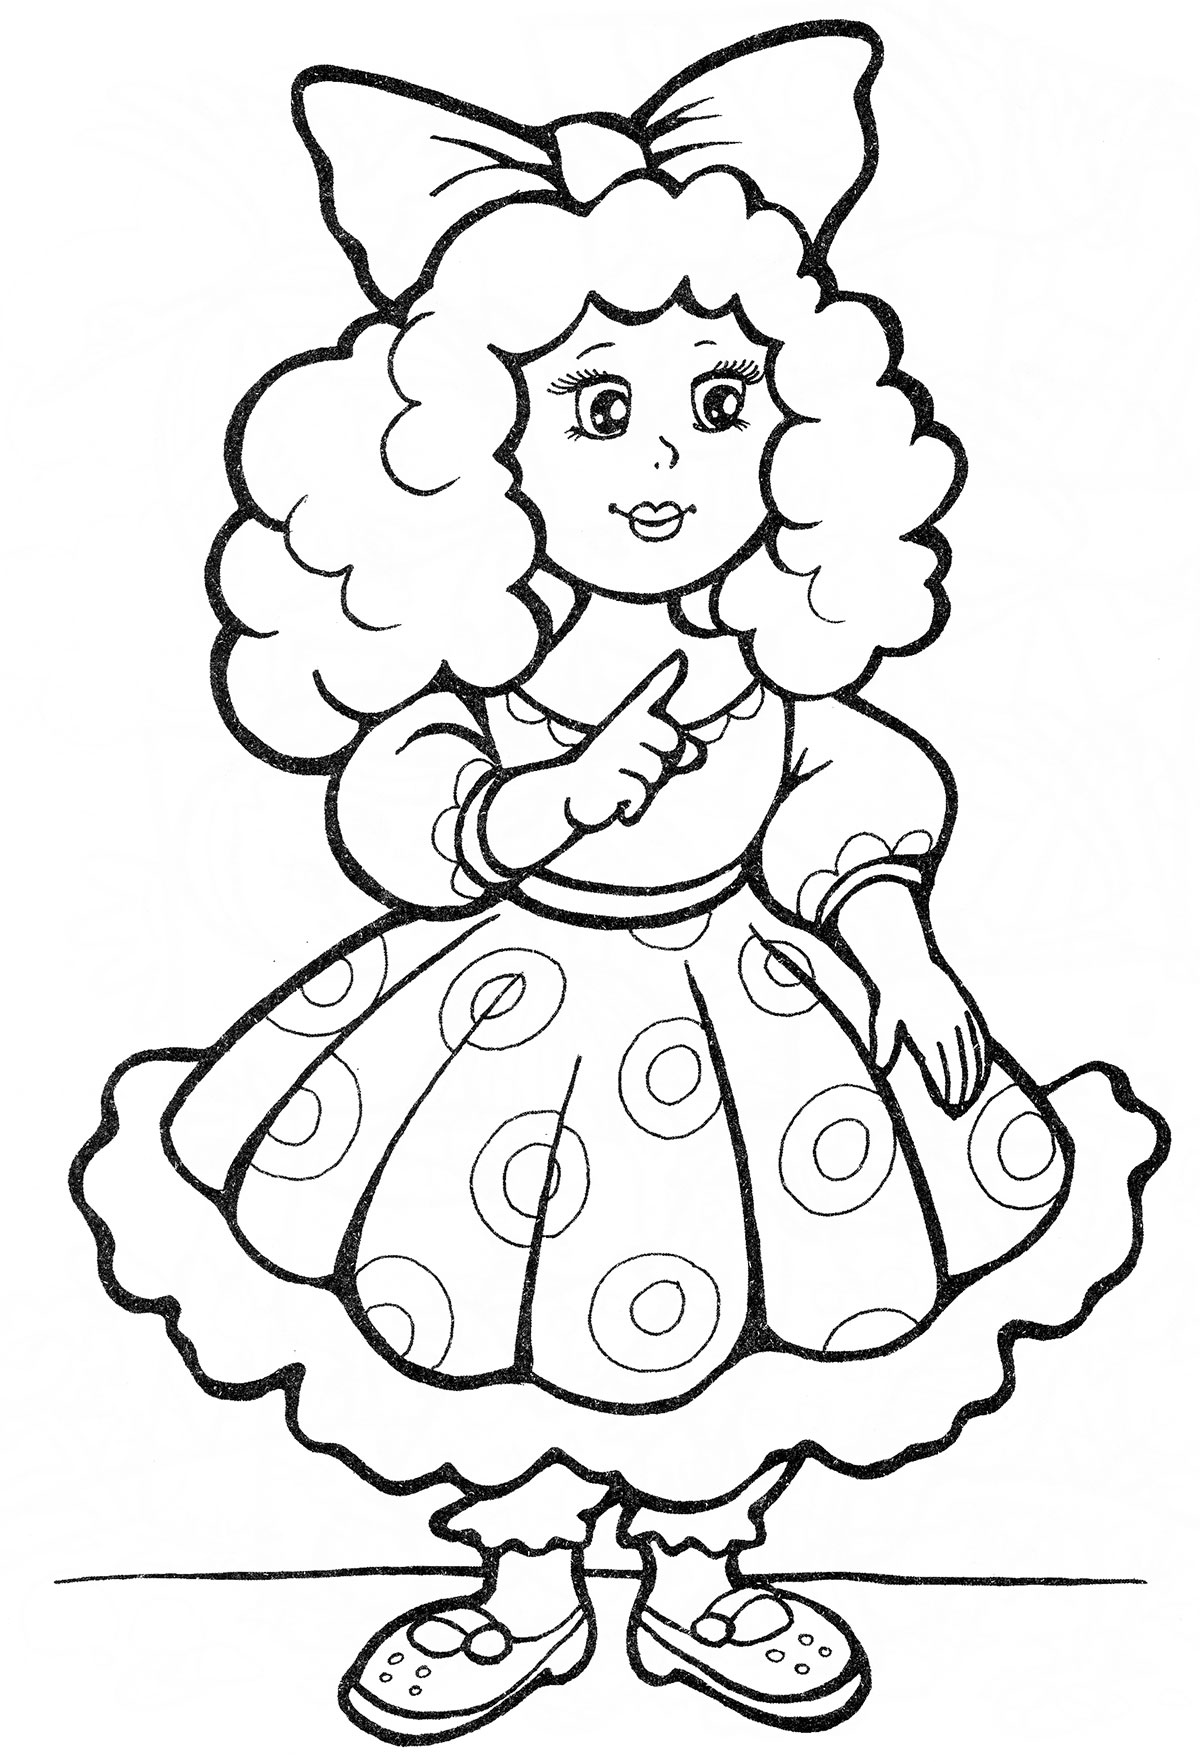 Coloring pages for children of 4-5 years to download and ...